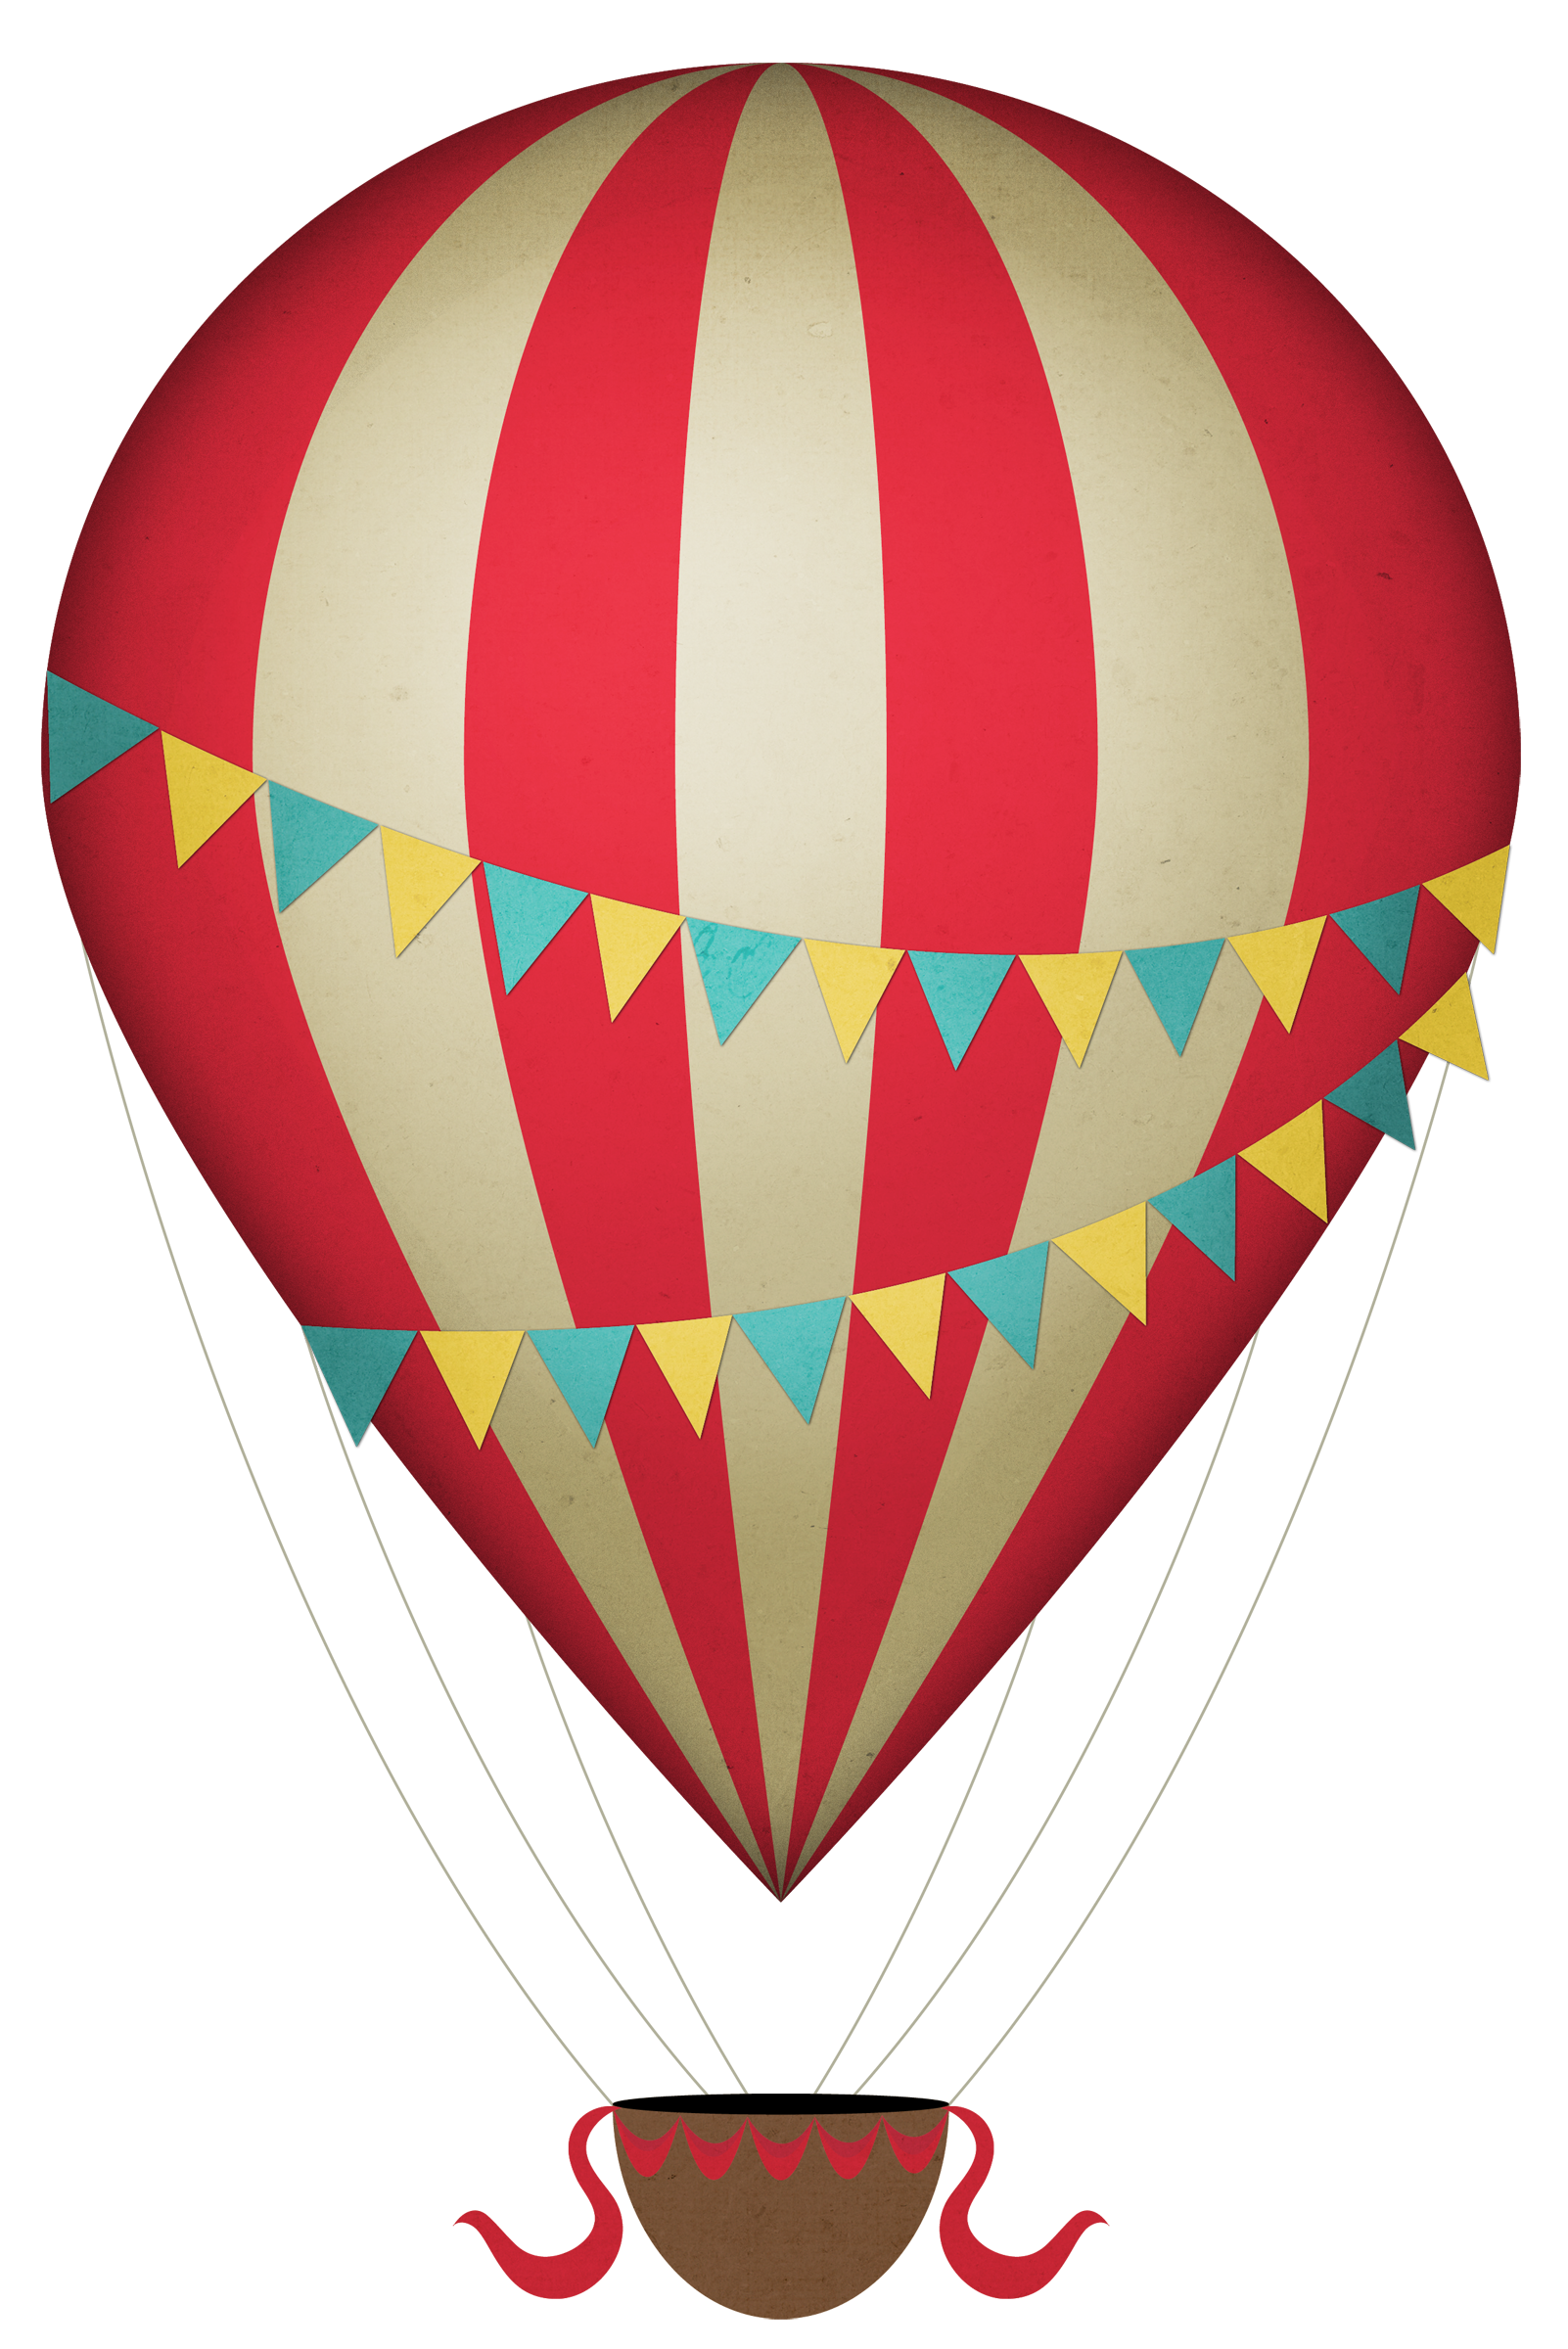 Vintage20hot20air20balloon20clipart up inspiration.